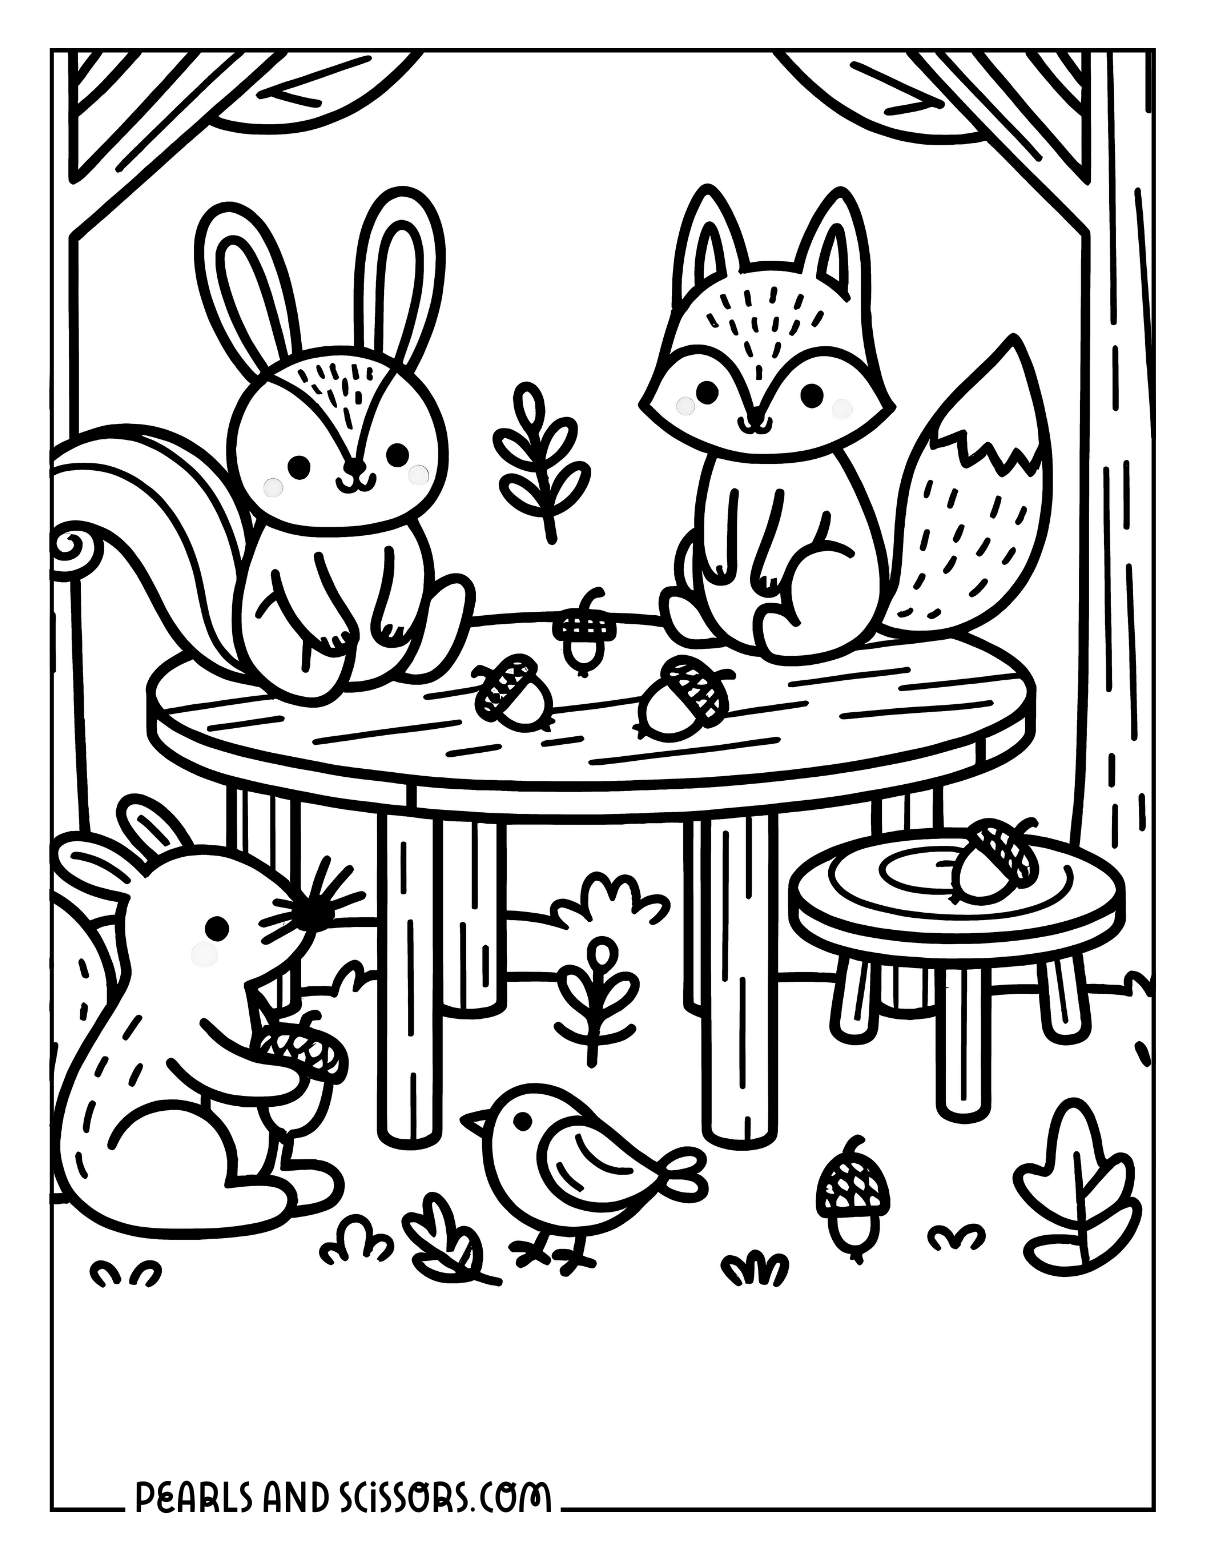 Kawaii animals friendsgiving in the woods coloring page for kids.